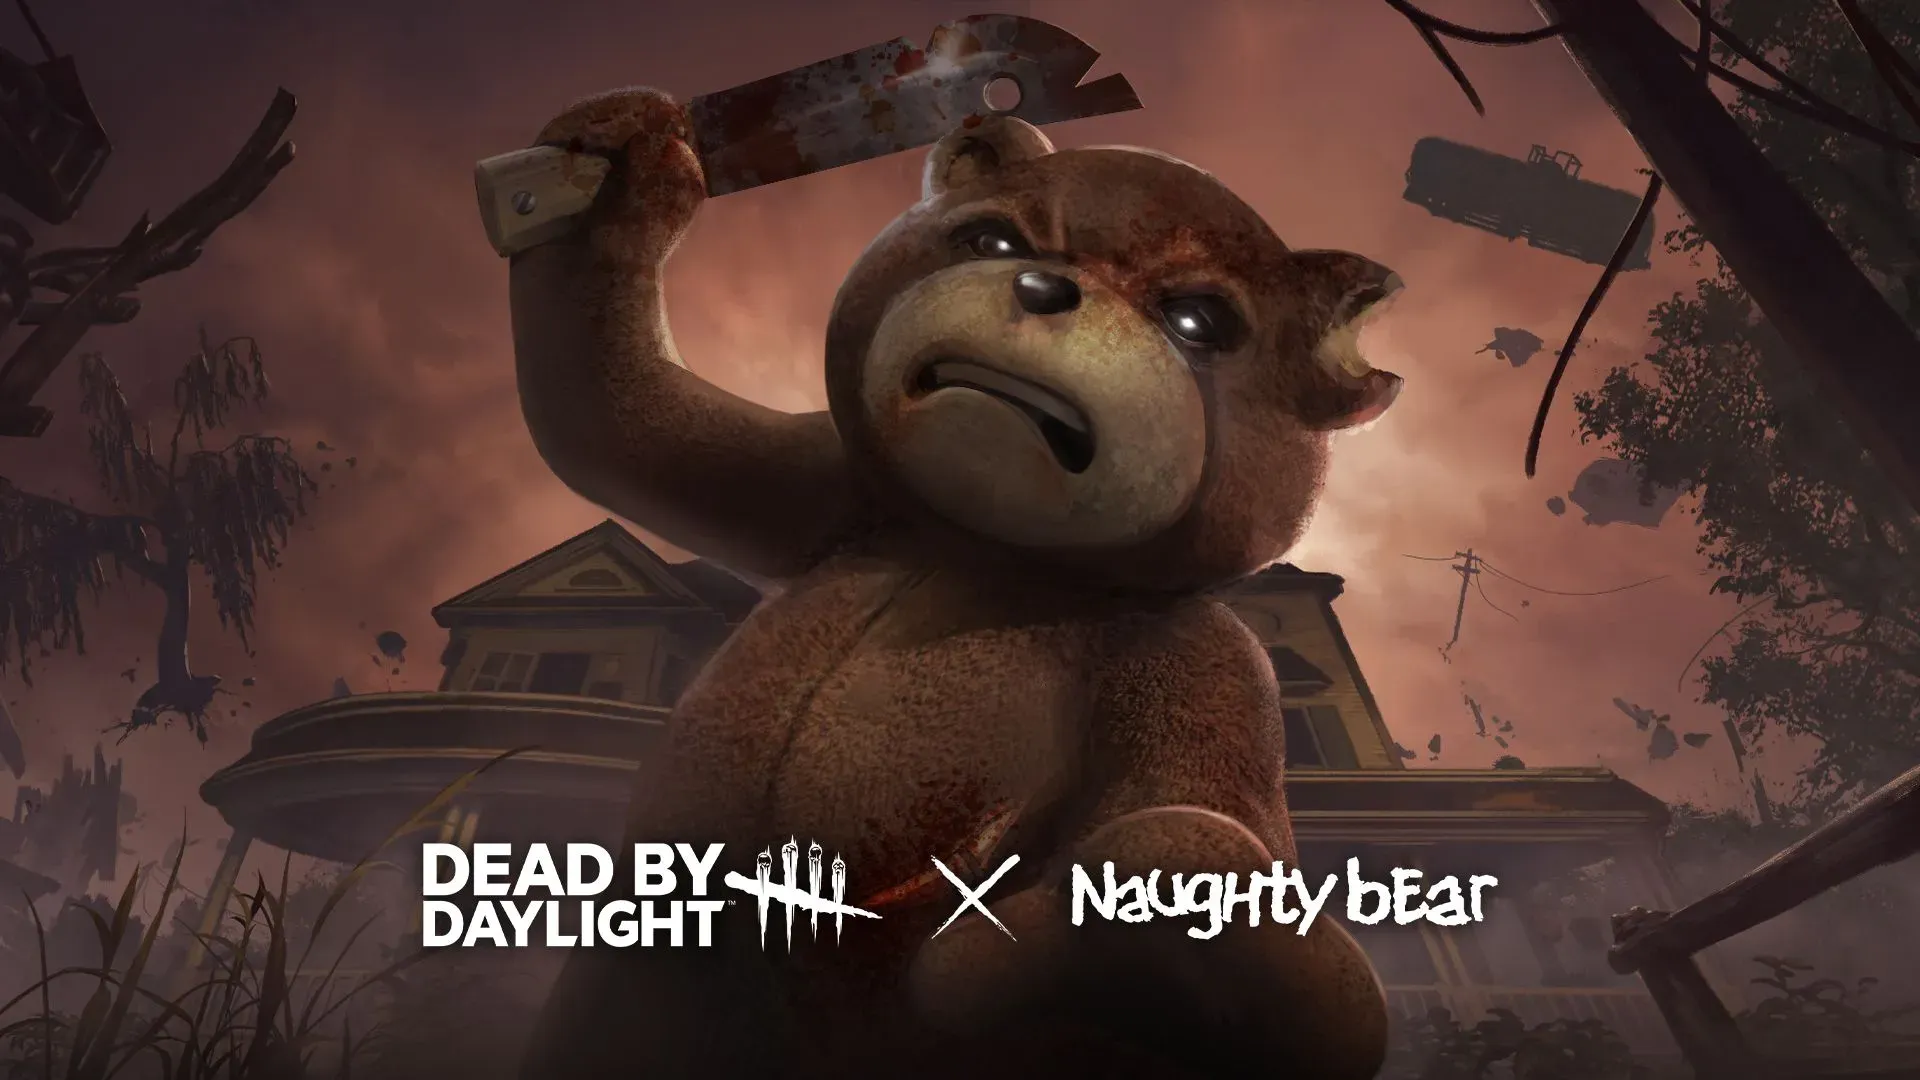 Naughty Bear Returns to Dead by Daylight: The Visceral Legendary Outfit for The Trapper